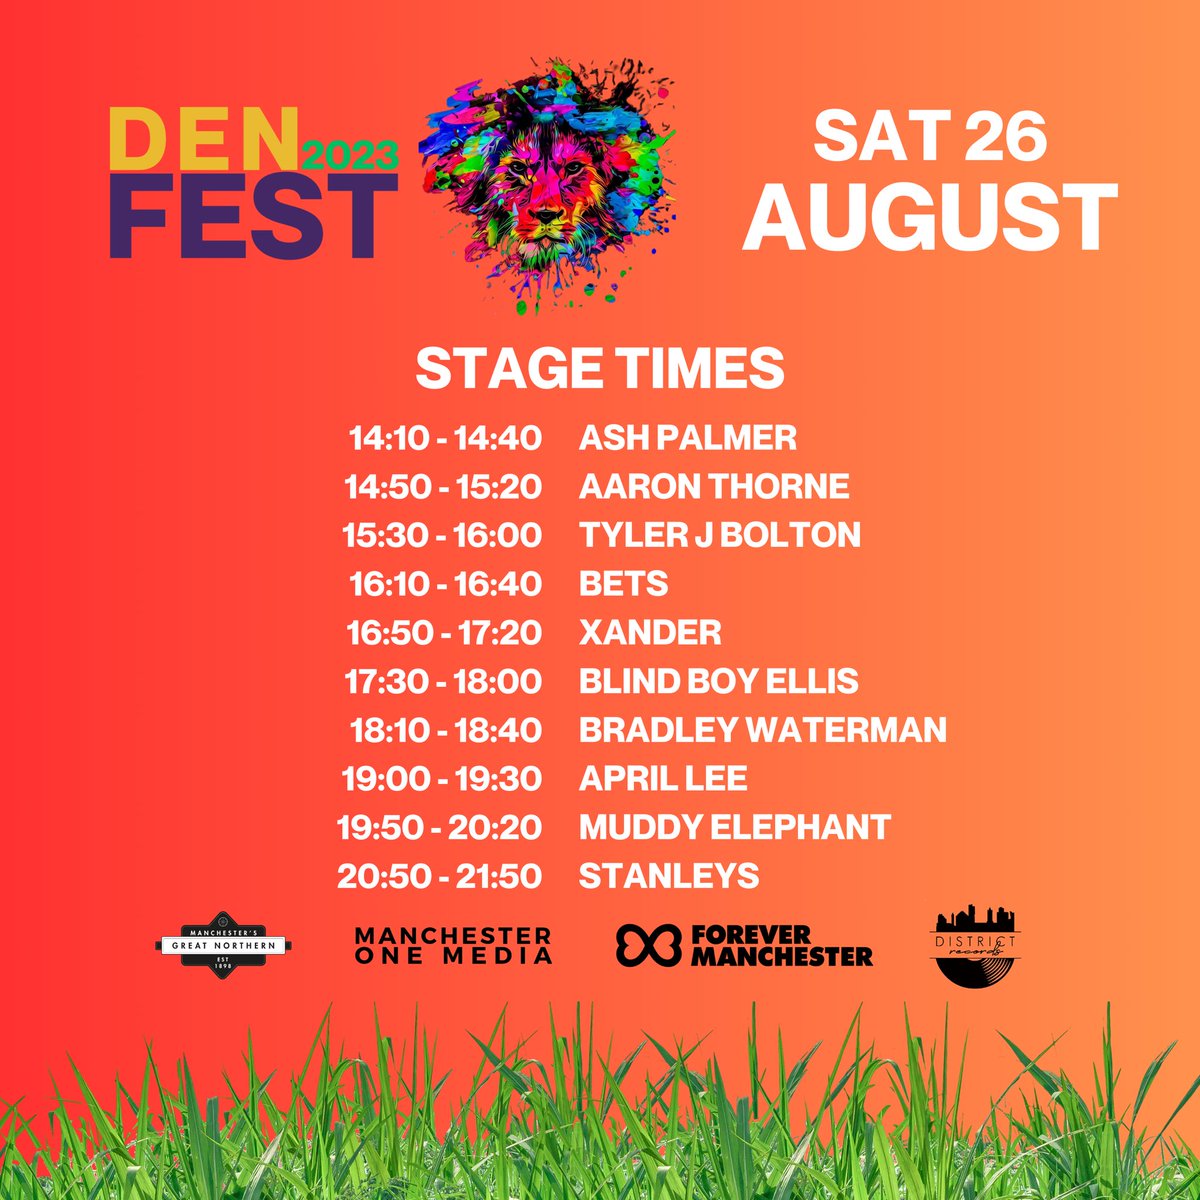 We needed plans this bank holiday, so found some at @DeansgateMews.

Tonight we’ll play a special set at Lions Den headlining Den Fest. 

It’s free so if you’re looking for something to do, get yourselves down for a chinwag x